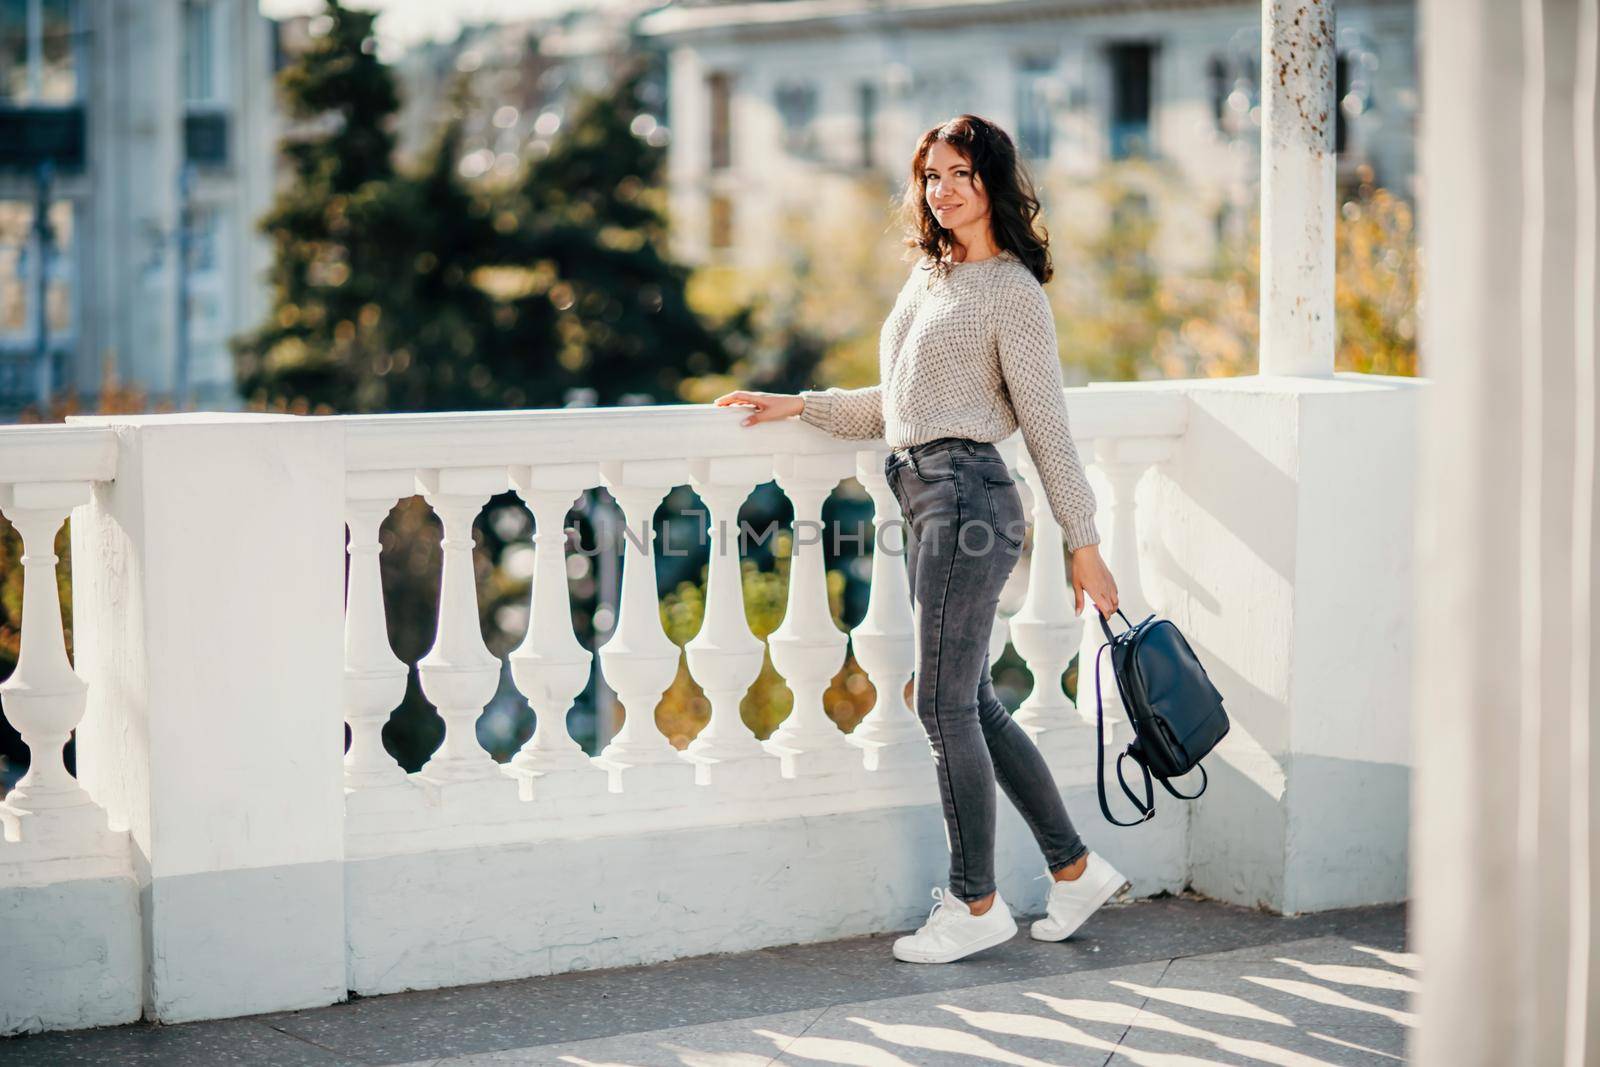 Lifestyle young woman in jeans, white sneakers, beige sweater. She is holding a backpack in one hand. Against the background of autumn trees and white balusters